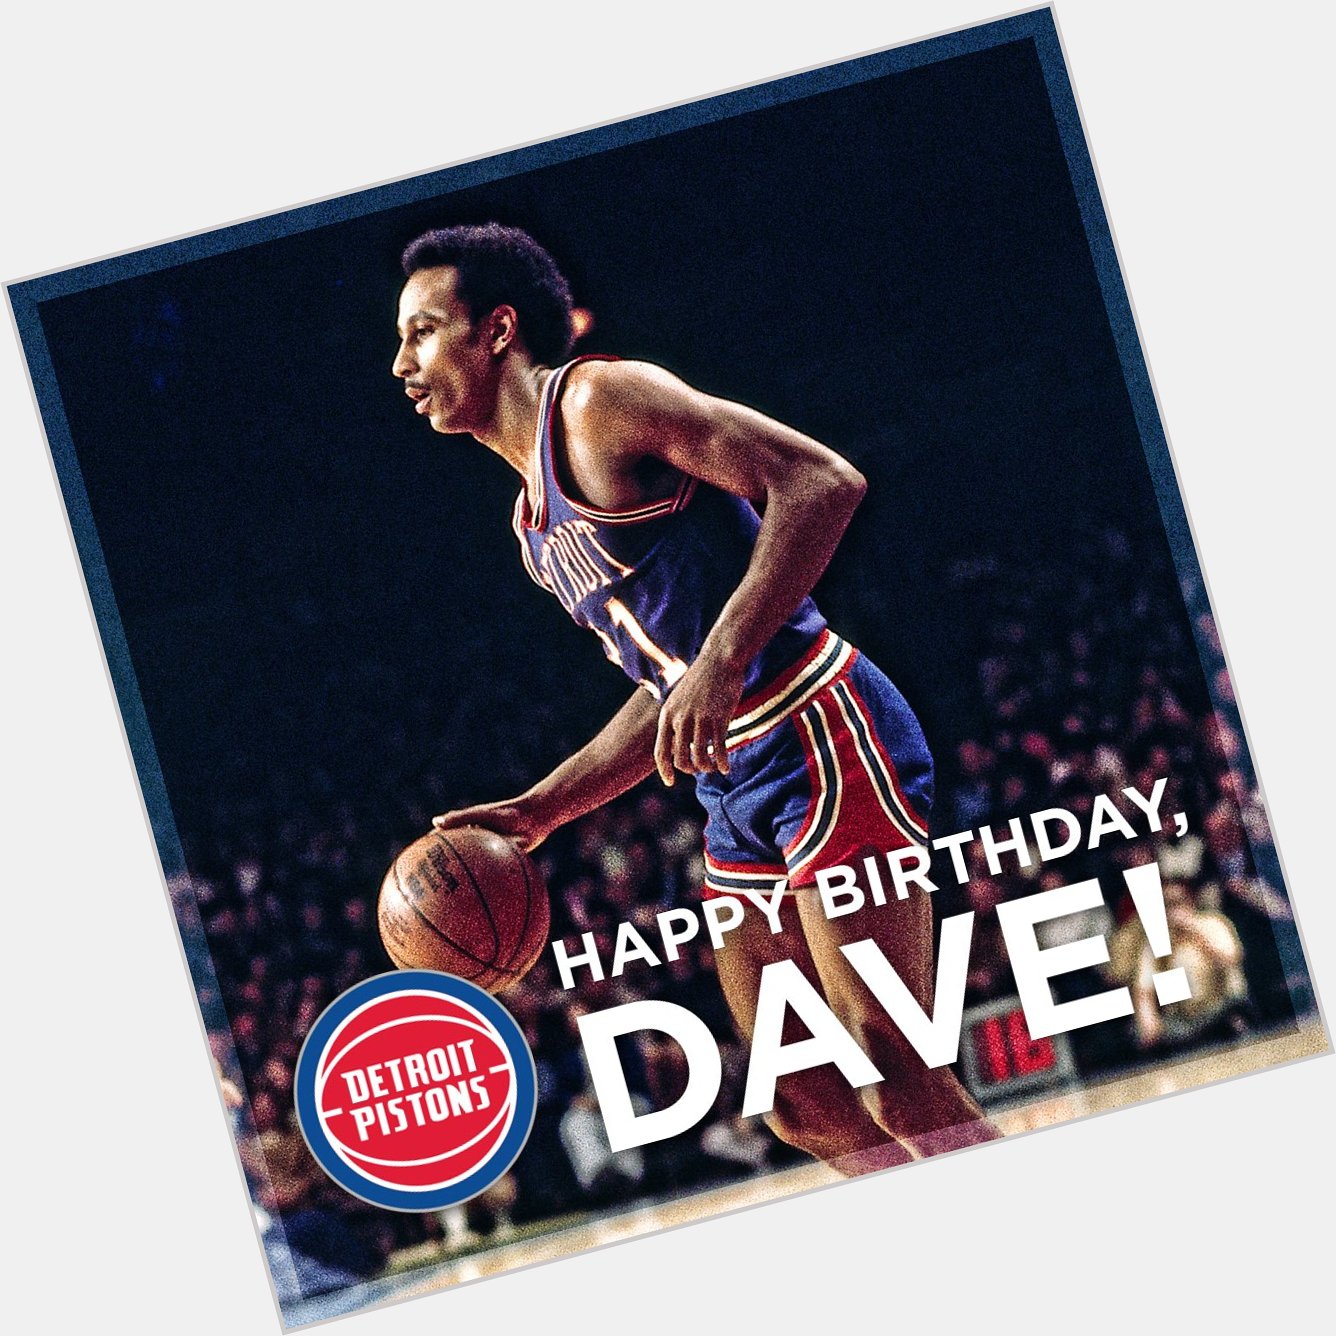 Join us in wishing the legendary Dave Bing a very Happy Birthday! 